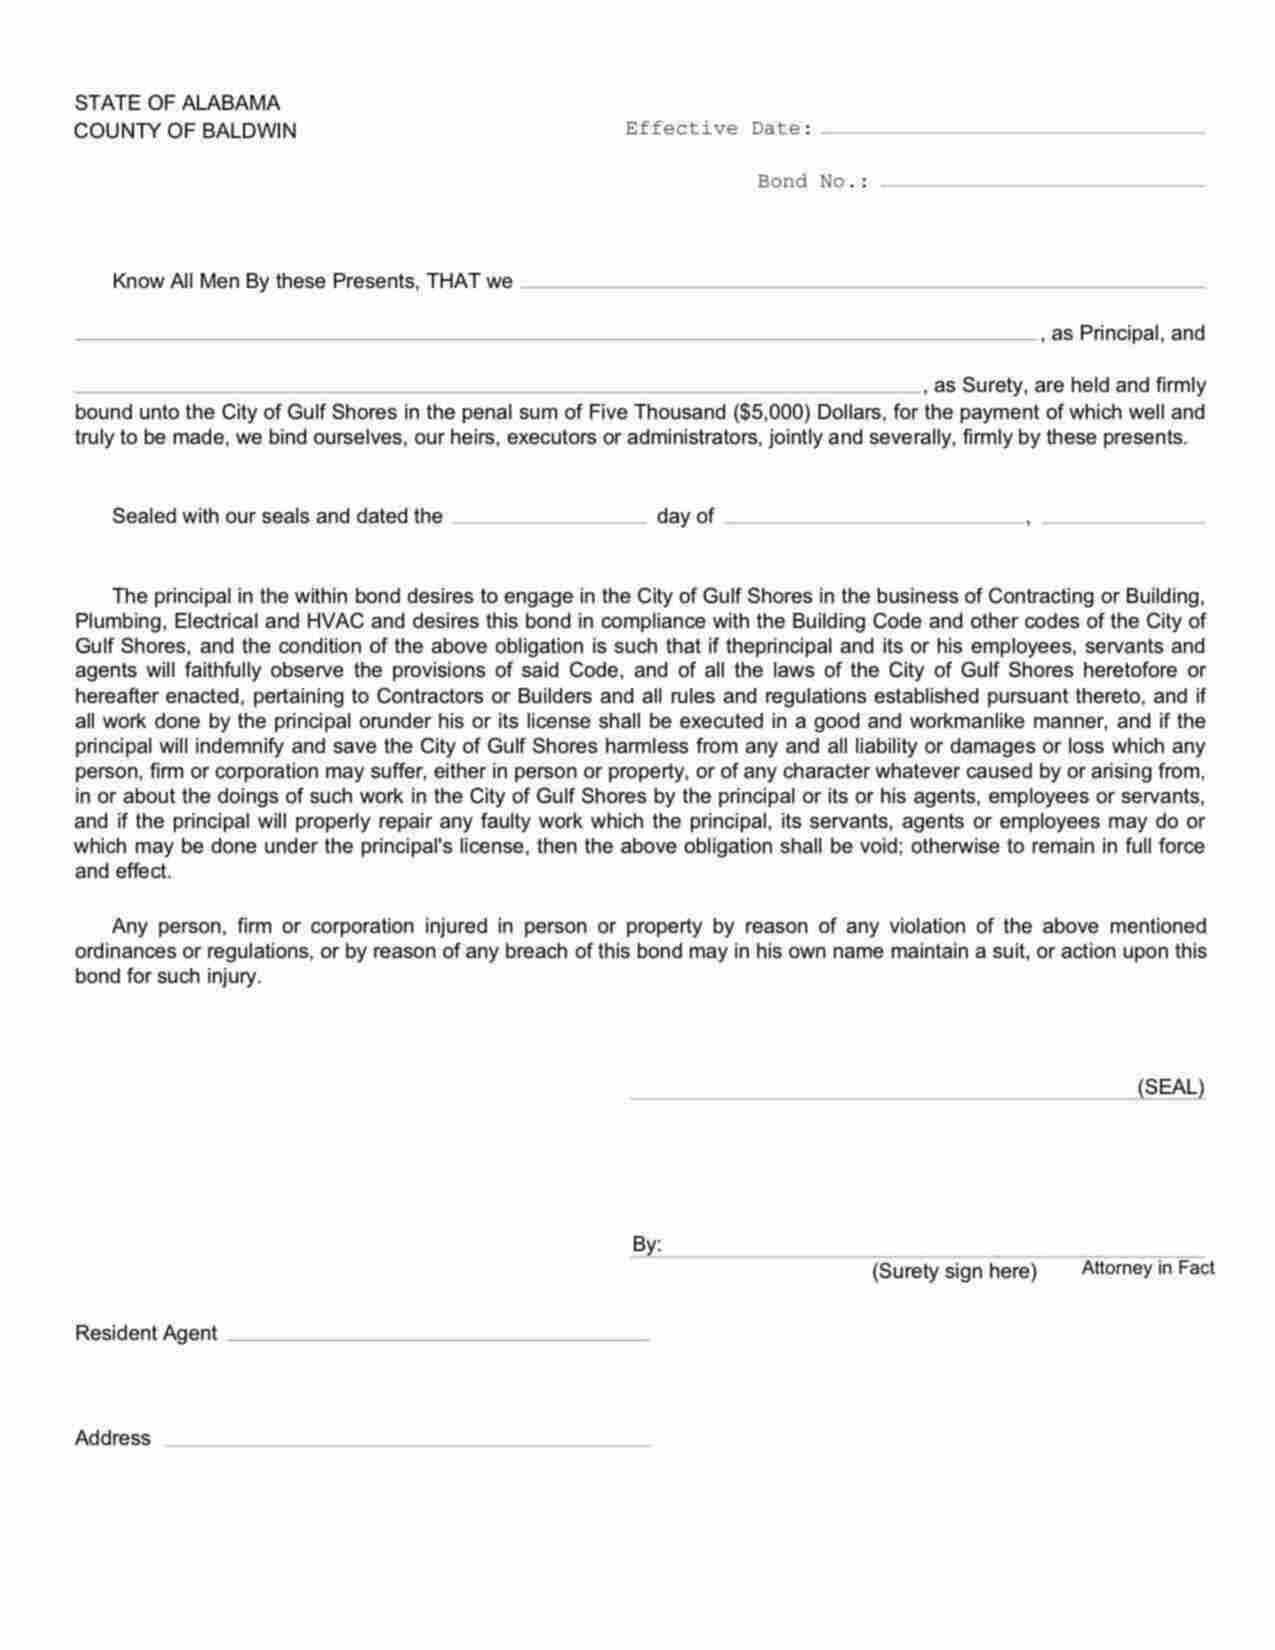 Alabama Building, Plumbing, Electrical and HVAC Contractor Bond Form